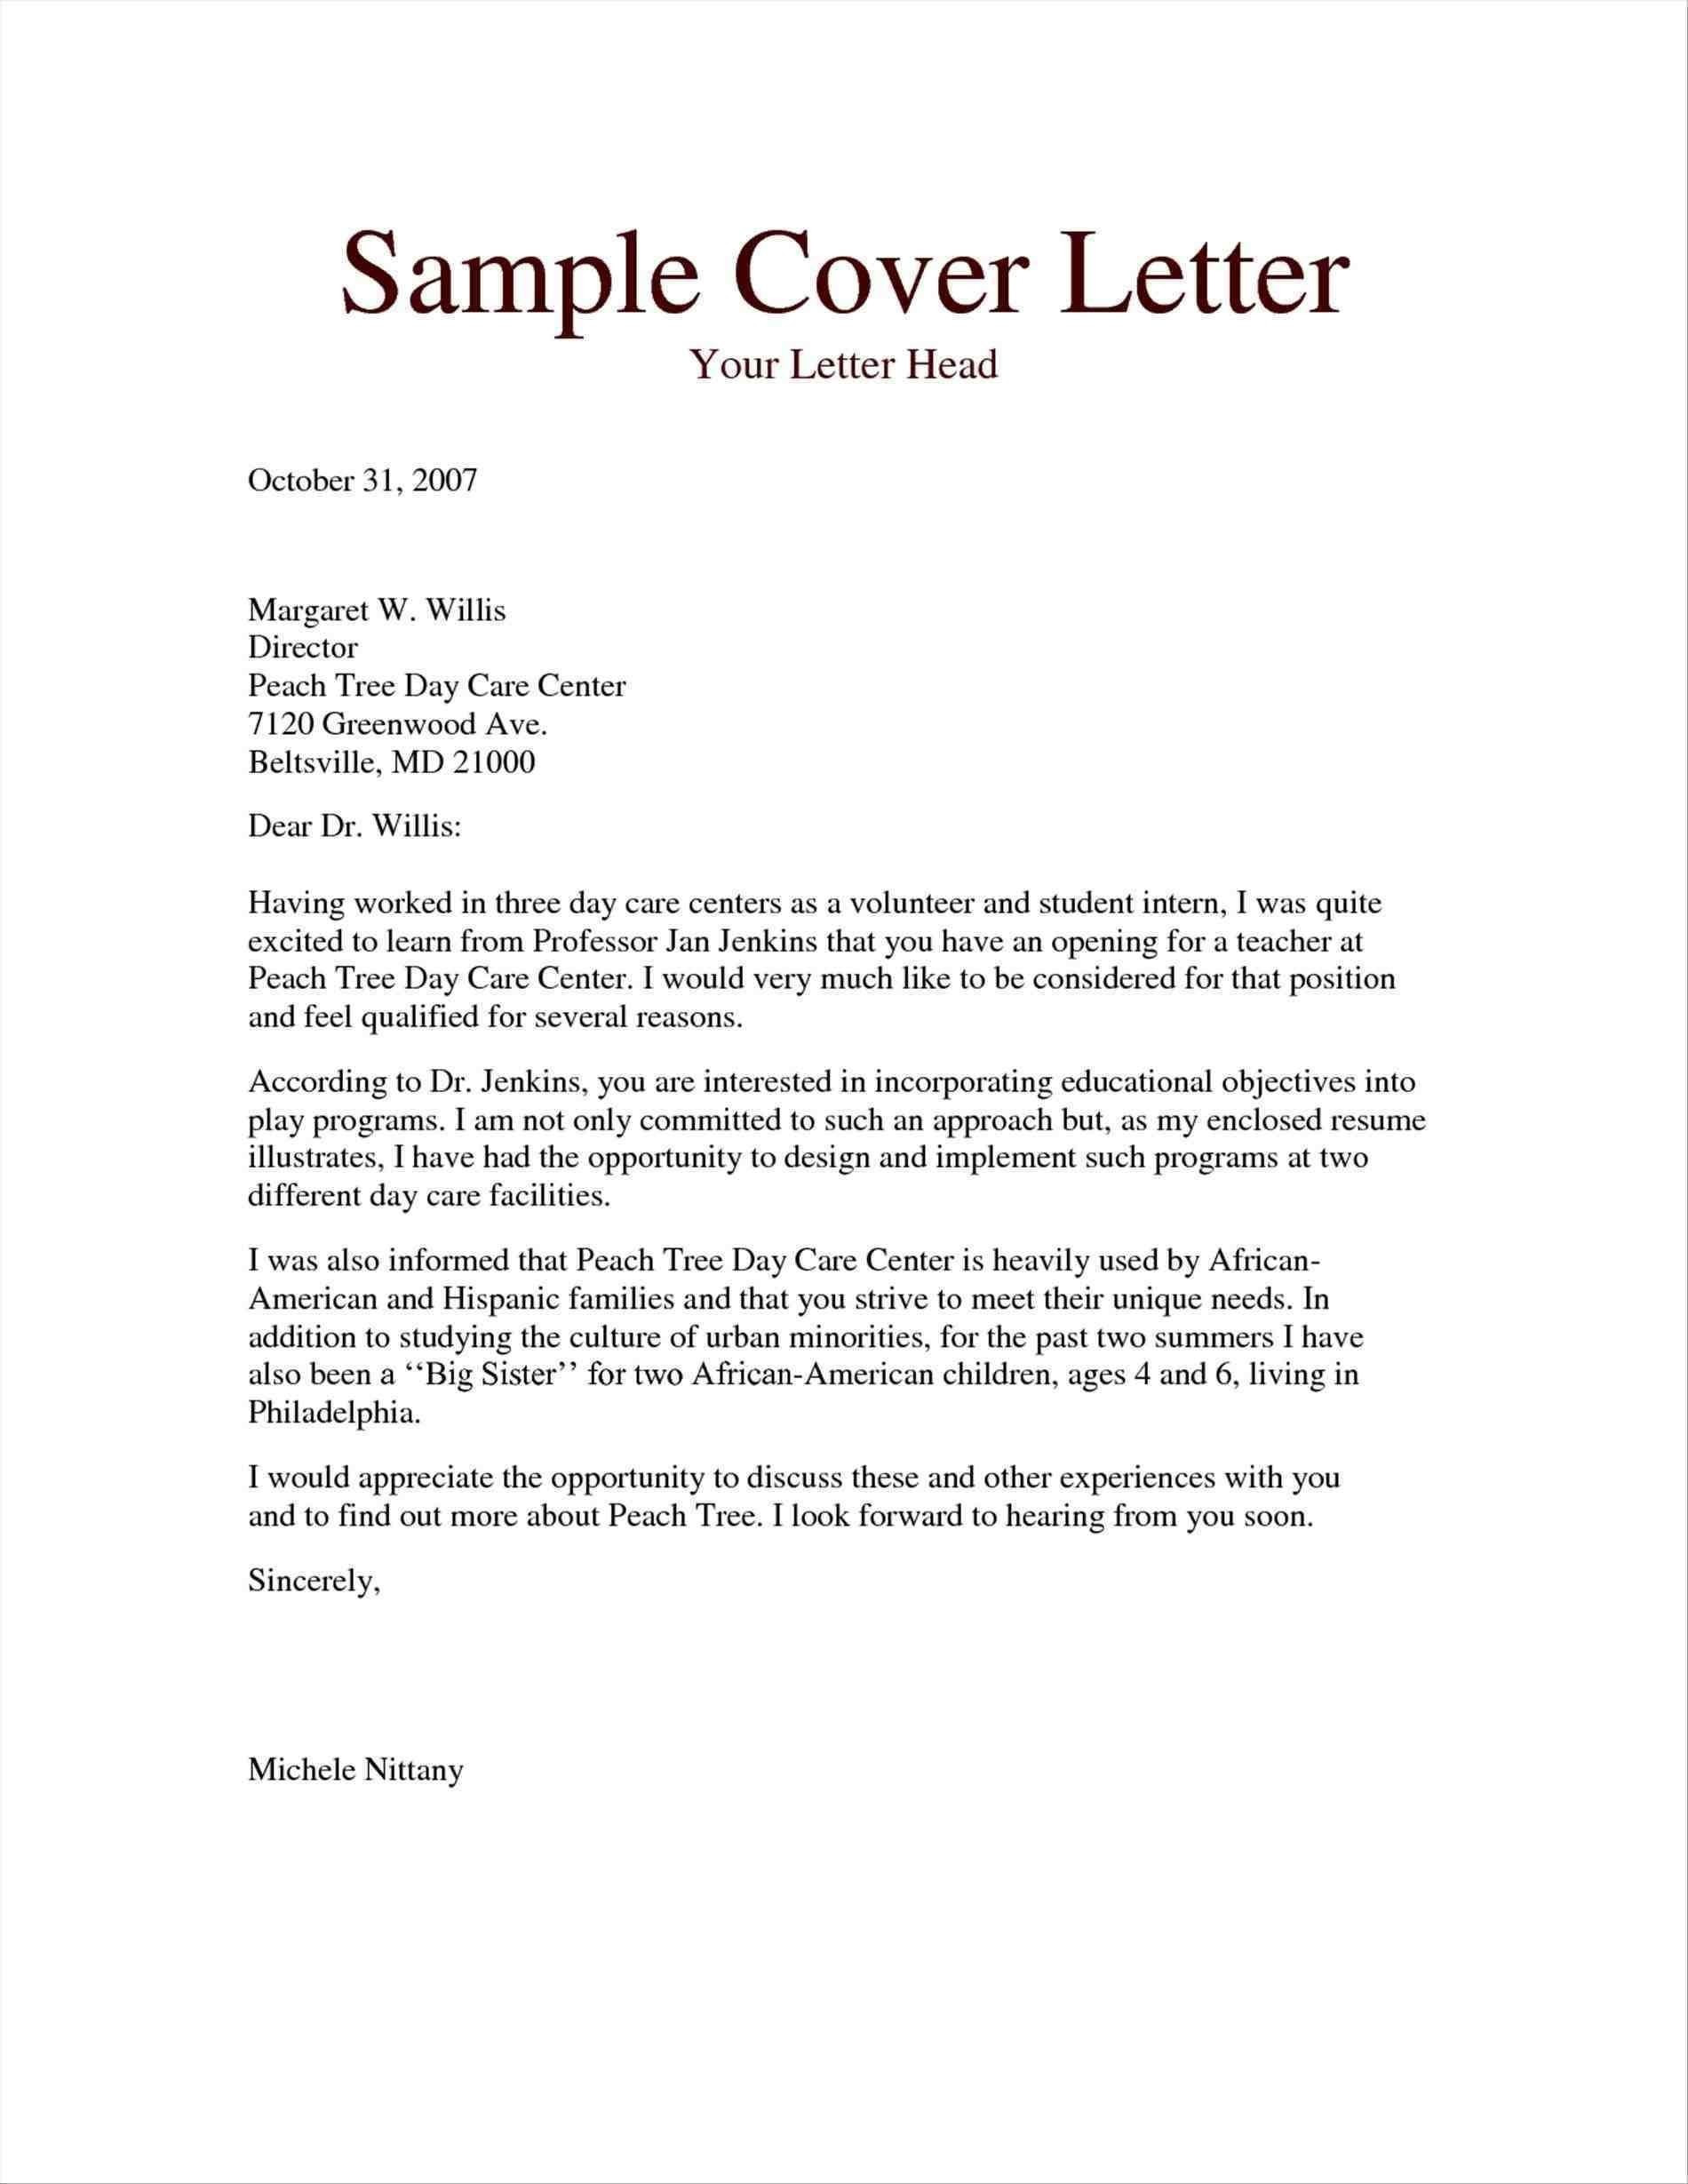 Sample Cover Letter for Resume No Experience Sample Cover Letter No Experience but Willing to Learn â Cover …